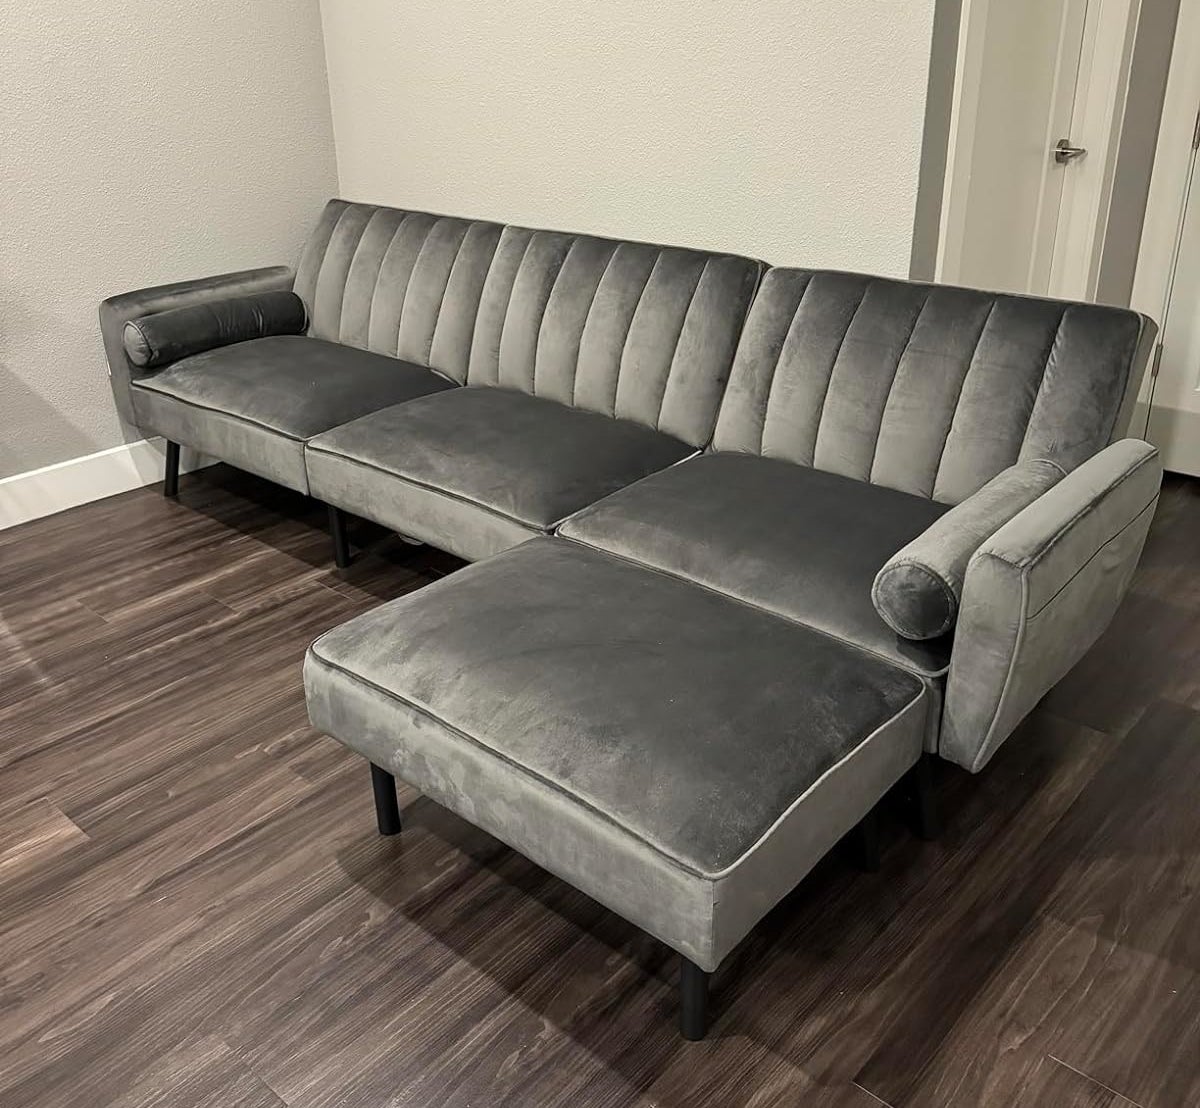 L-shaped sectional gray sofa with extended chaise lounge on wooden flooring